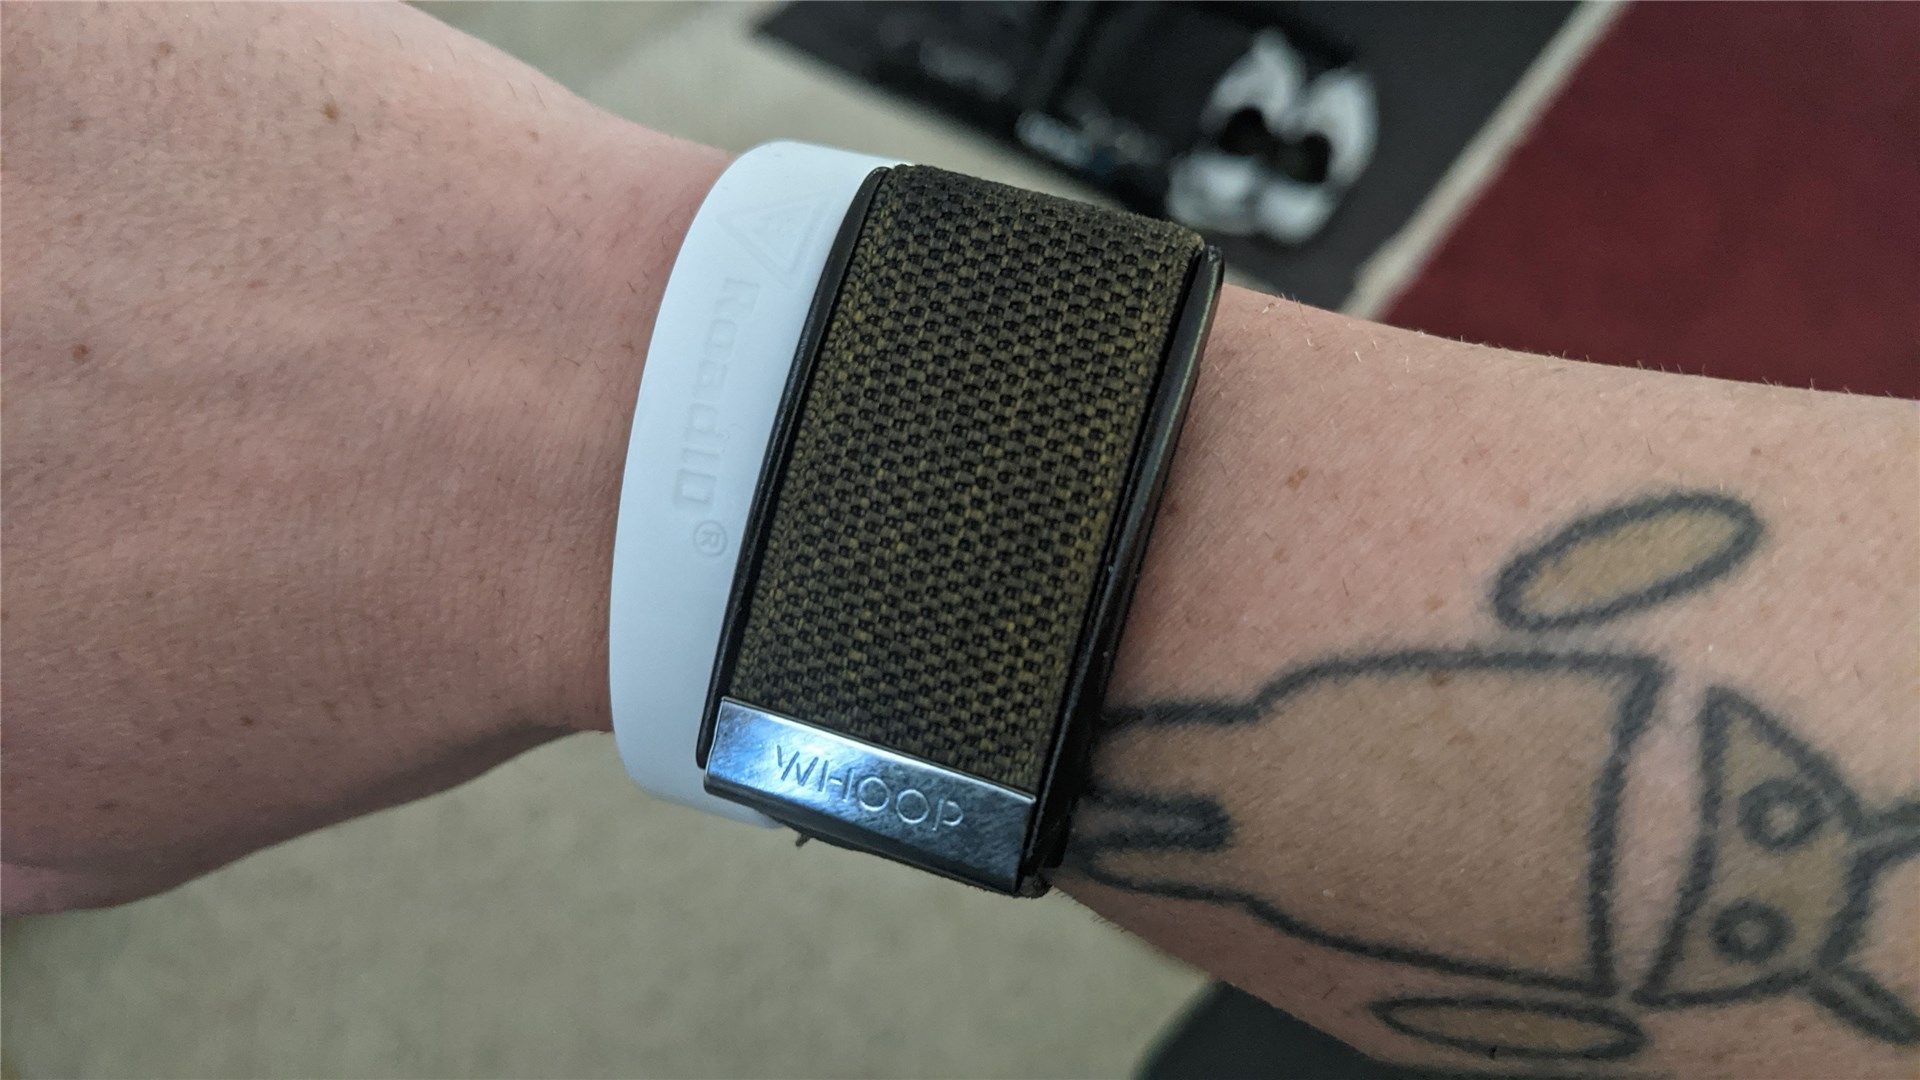 The Whoop band on my wrist; Android tattoo above, Road ID bracelet below